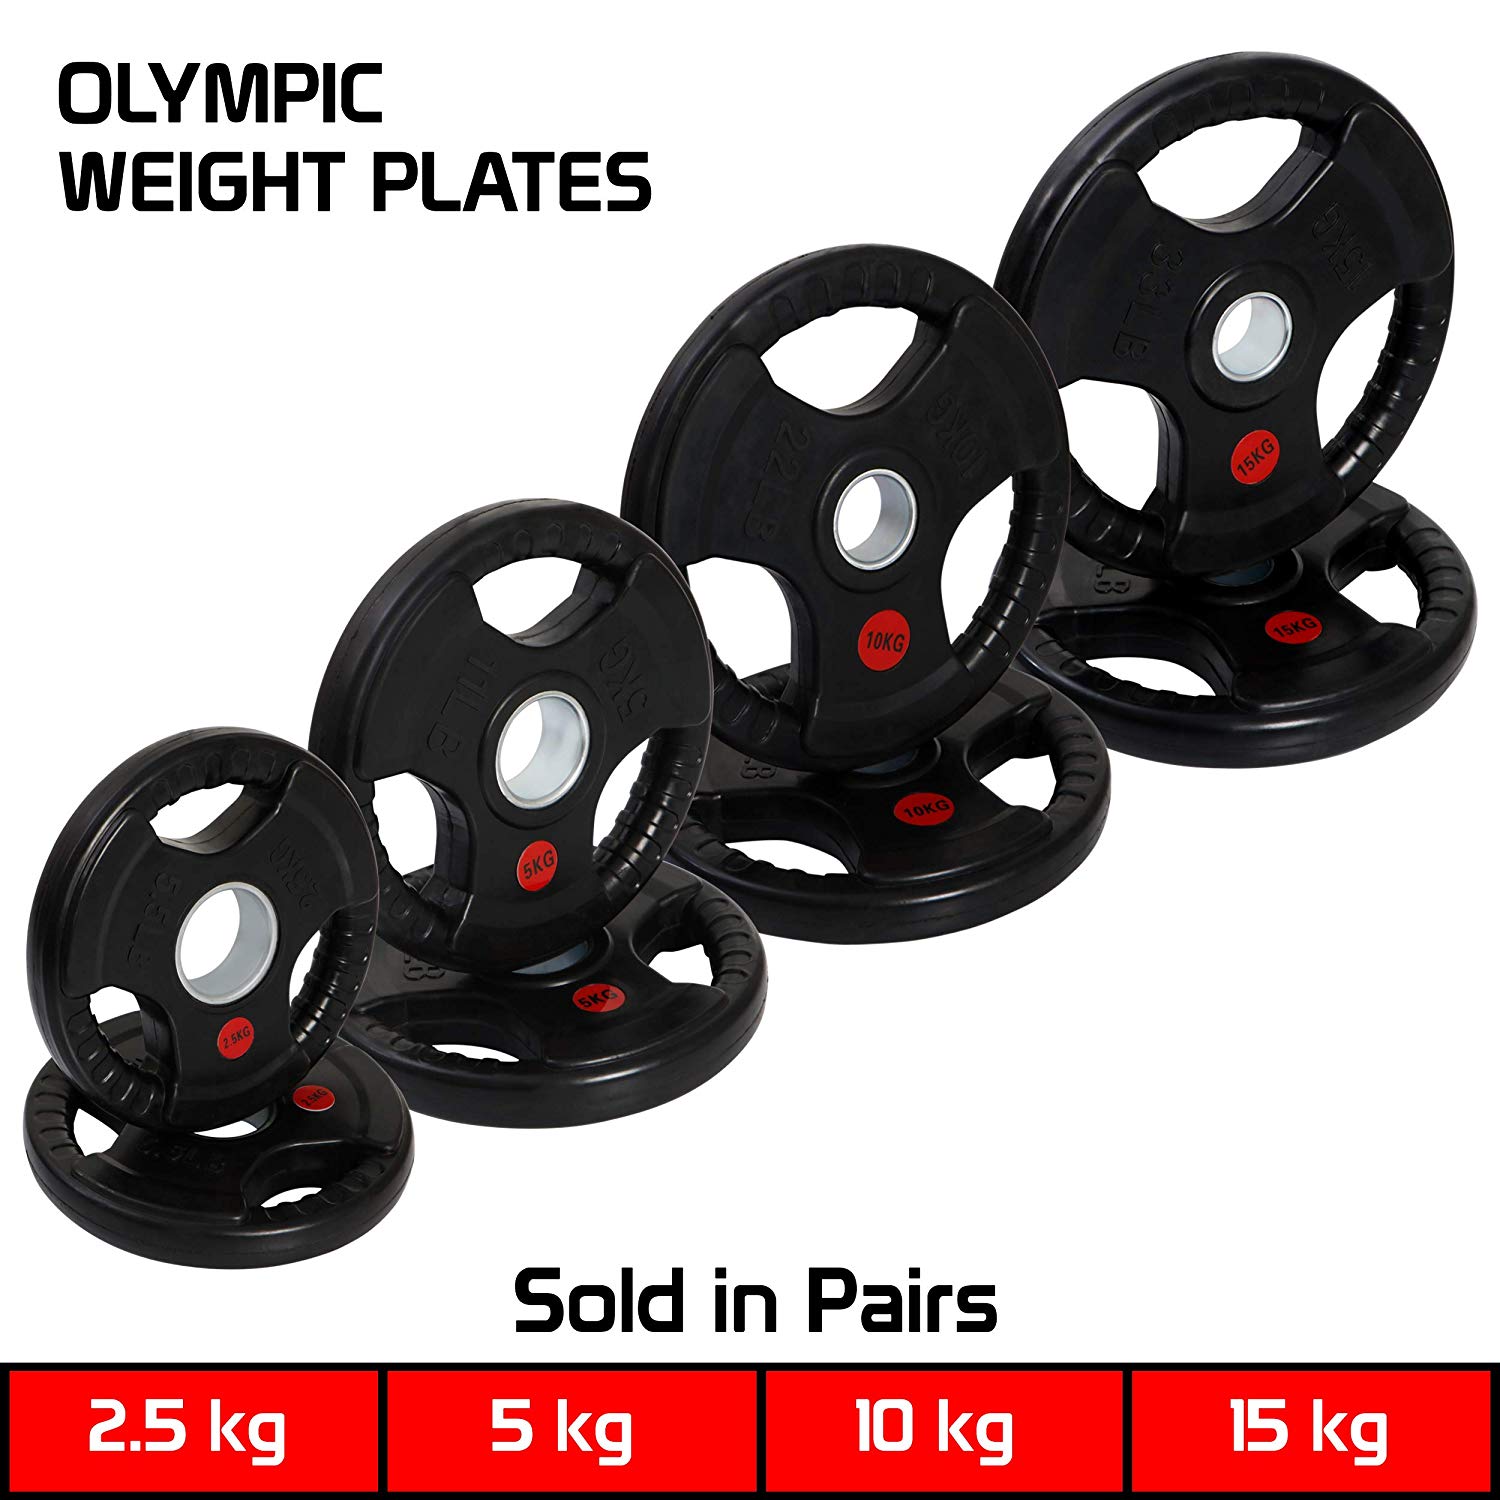 TRI-GRIP Olympic Weight Rubber Plates 15kg (Pair) - Click Image to Close